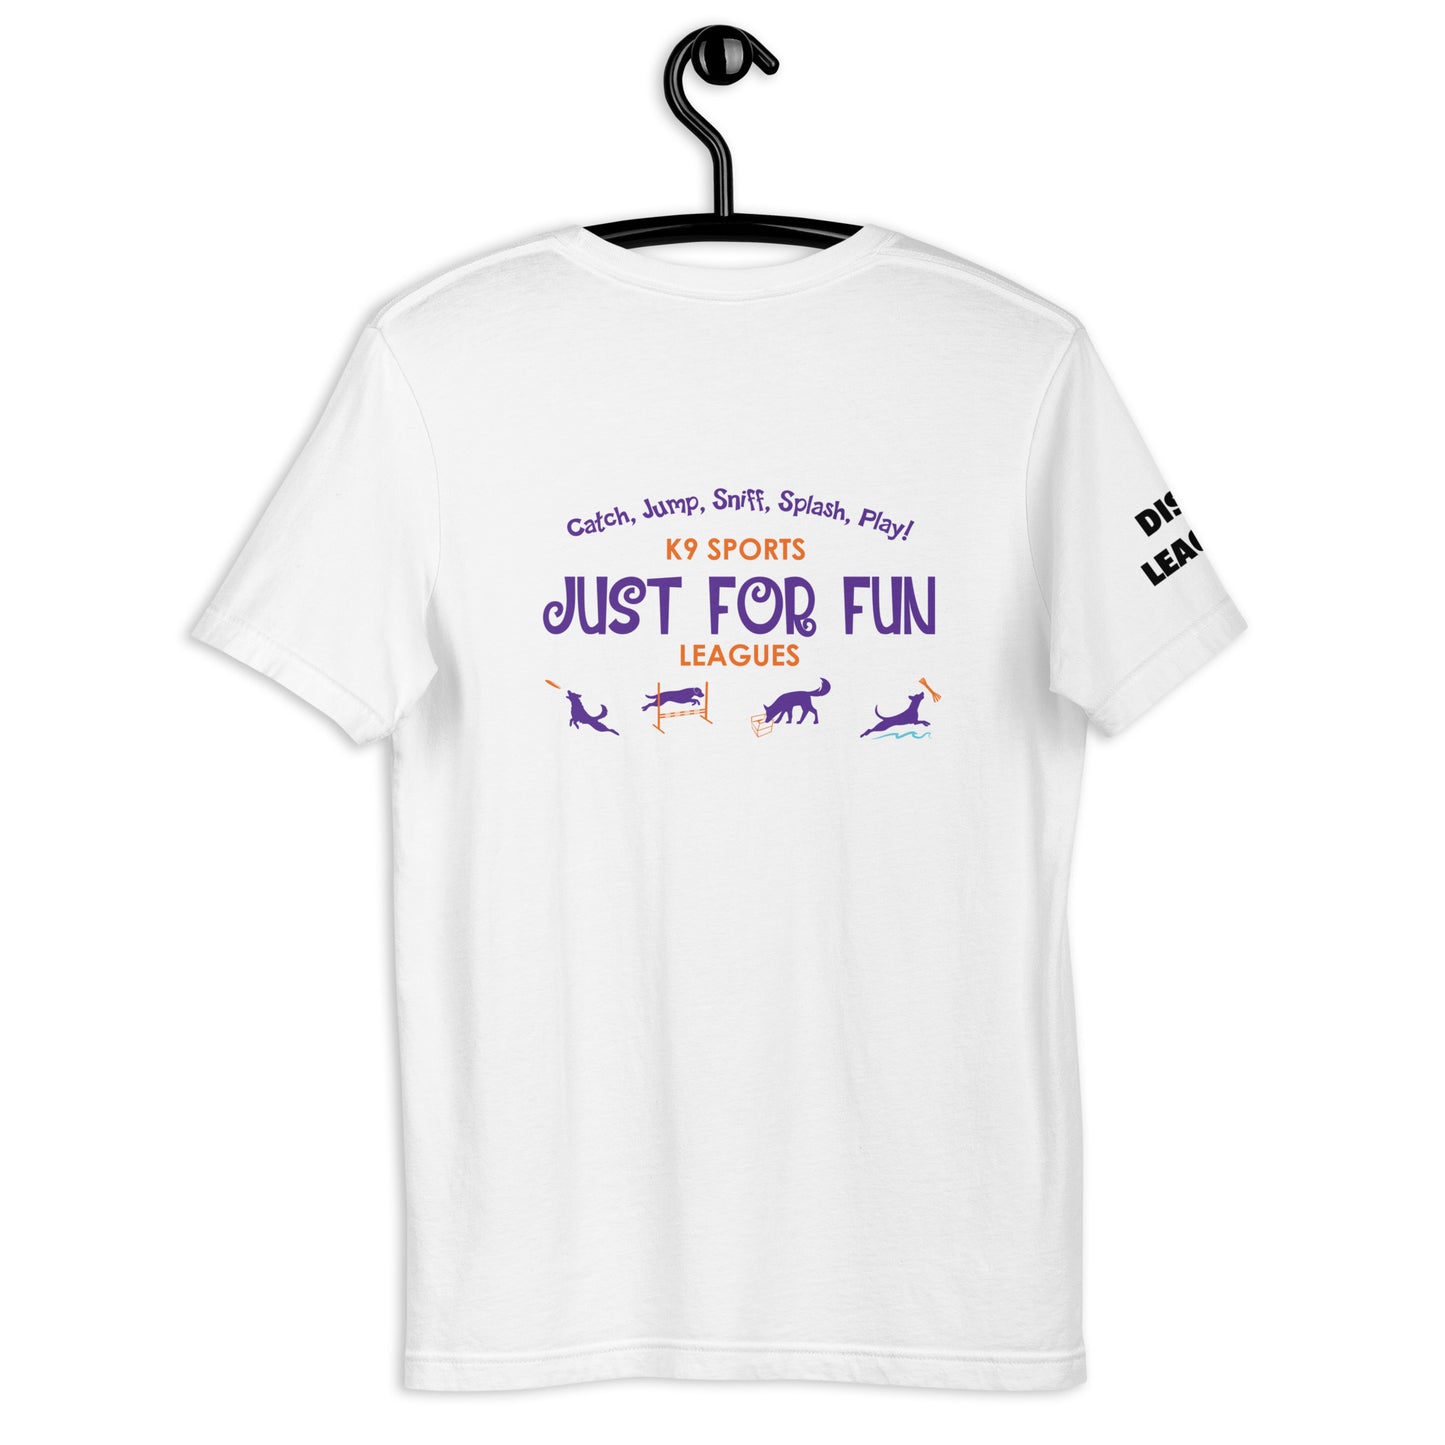 JUST FOR FUN - Unisex t-shirt